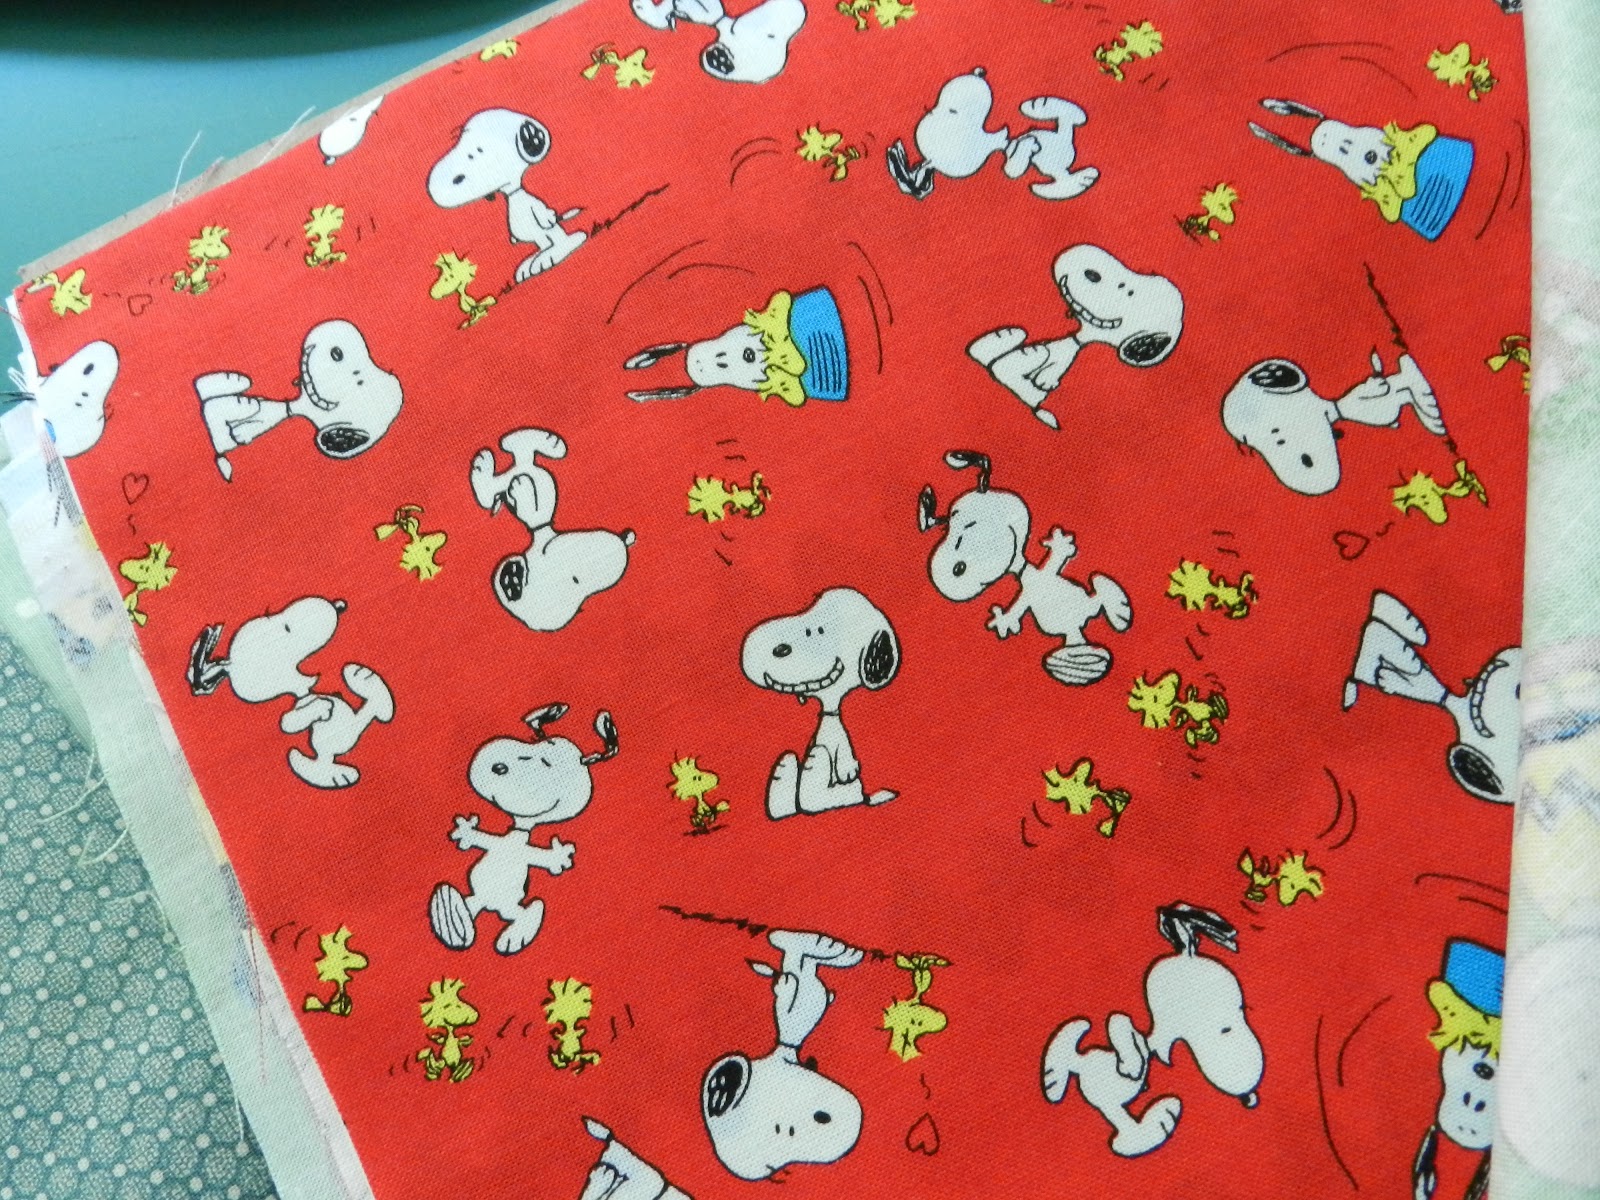 Peanuts Linus Snoopy Woodstock “Happiness Is A Thumb and a Blanket” Quilt